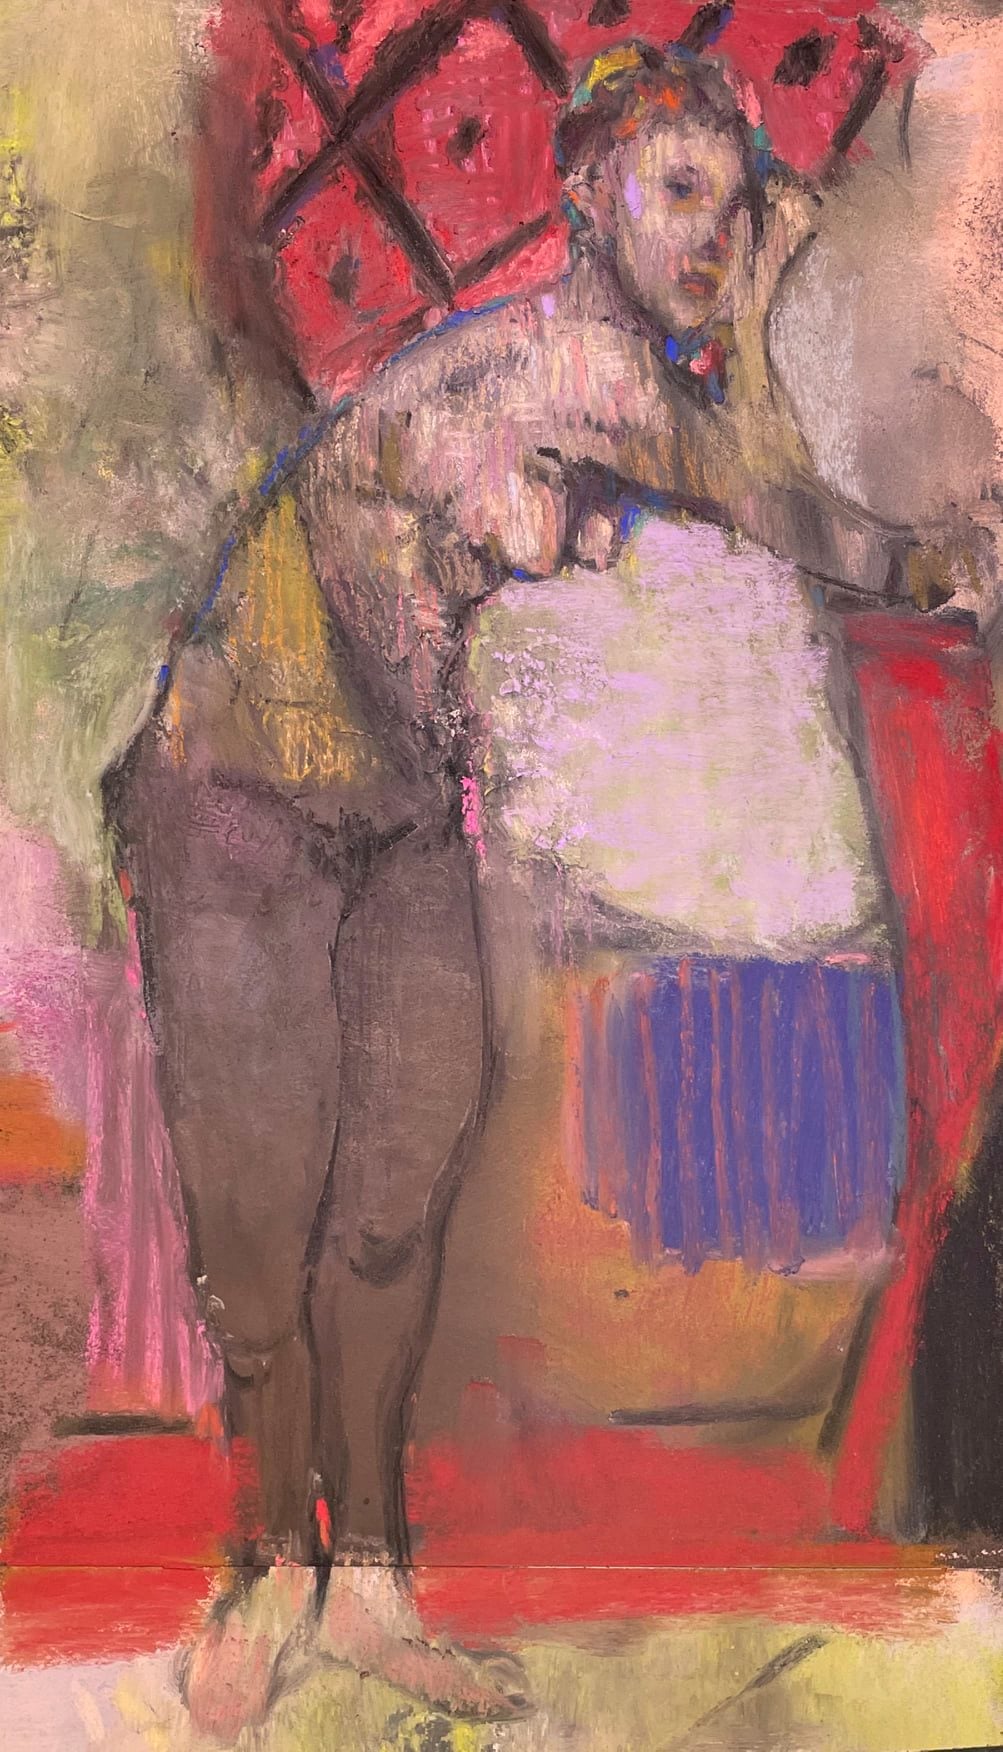 Matisse's influence: Casey Klahn, "Astrid From Croquis Cafe," 2021, pastel on paper